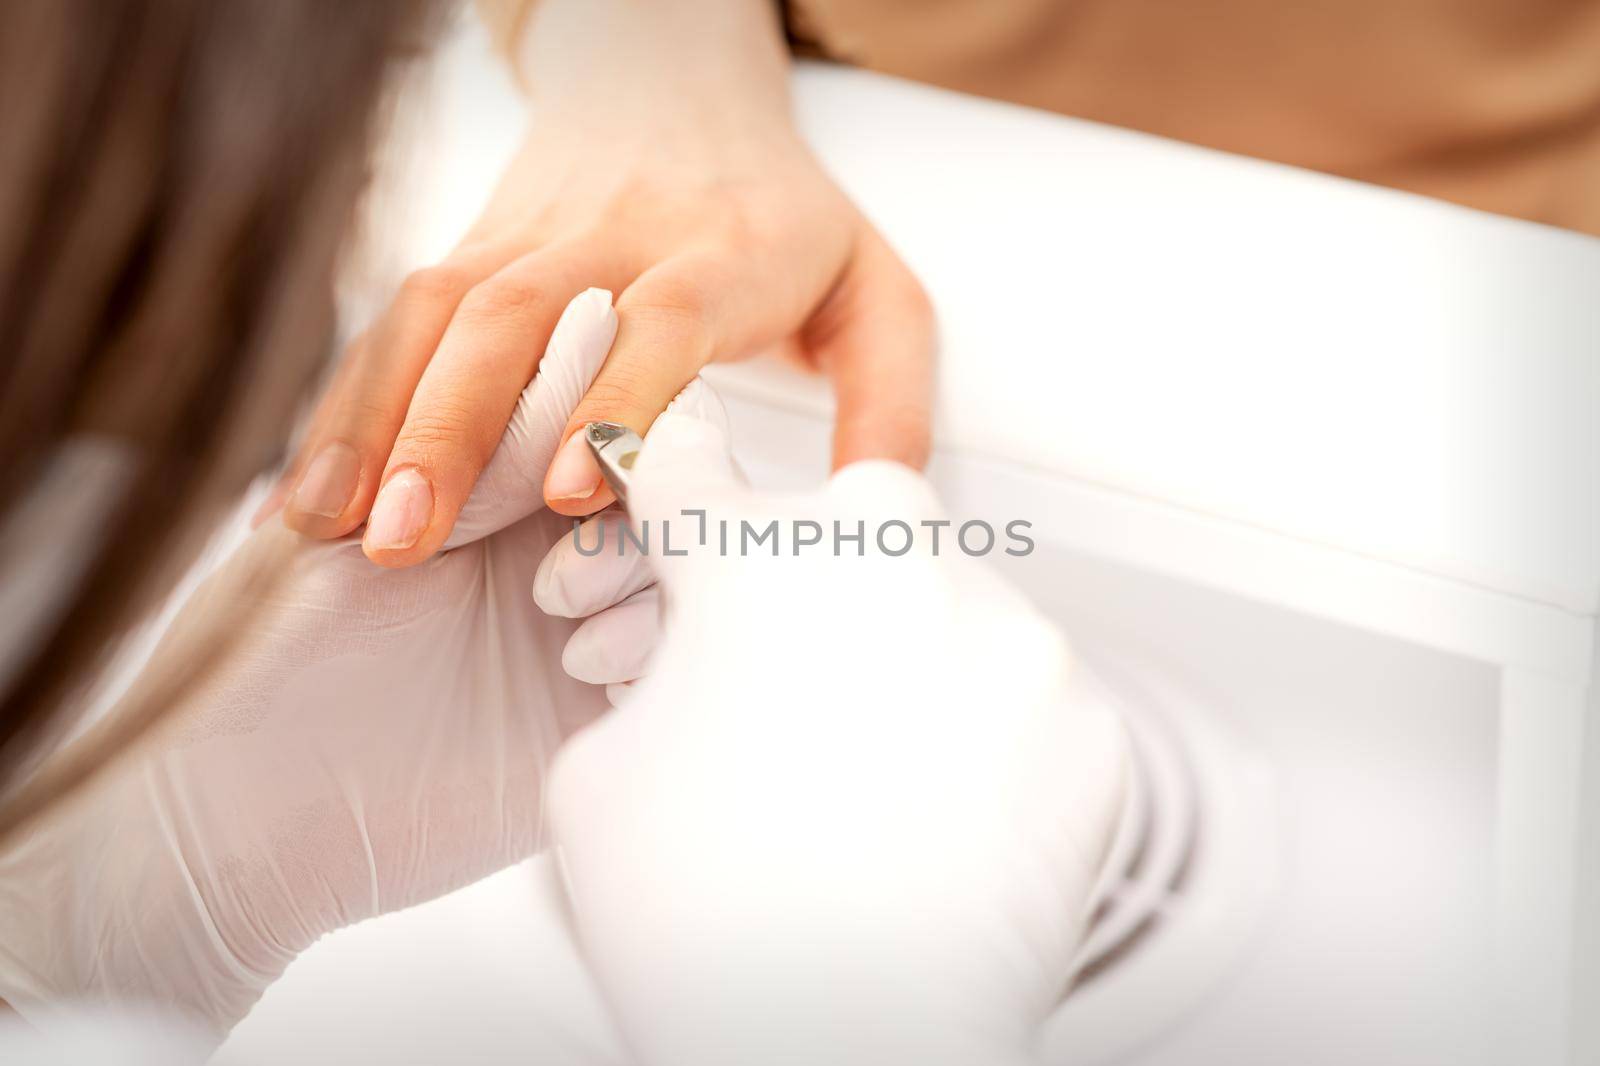 Manicure master uses manicure clippers removing cuticles on female nails in a beauty salon close up. by okskukuruza